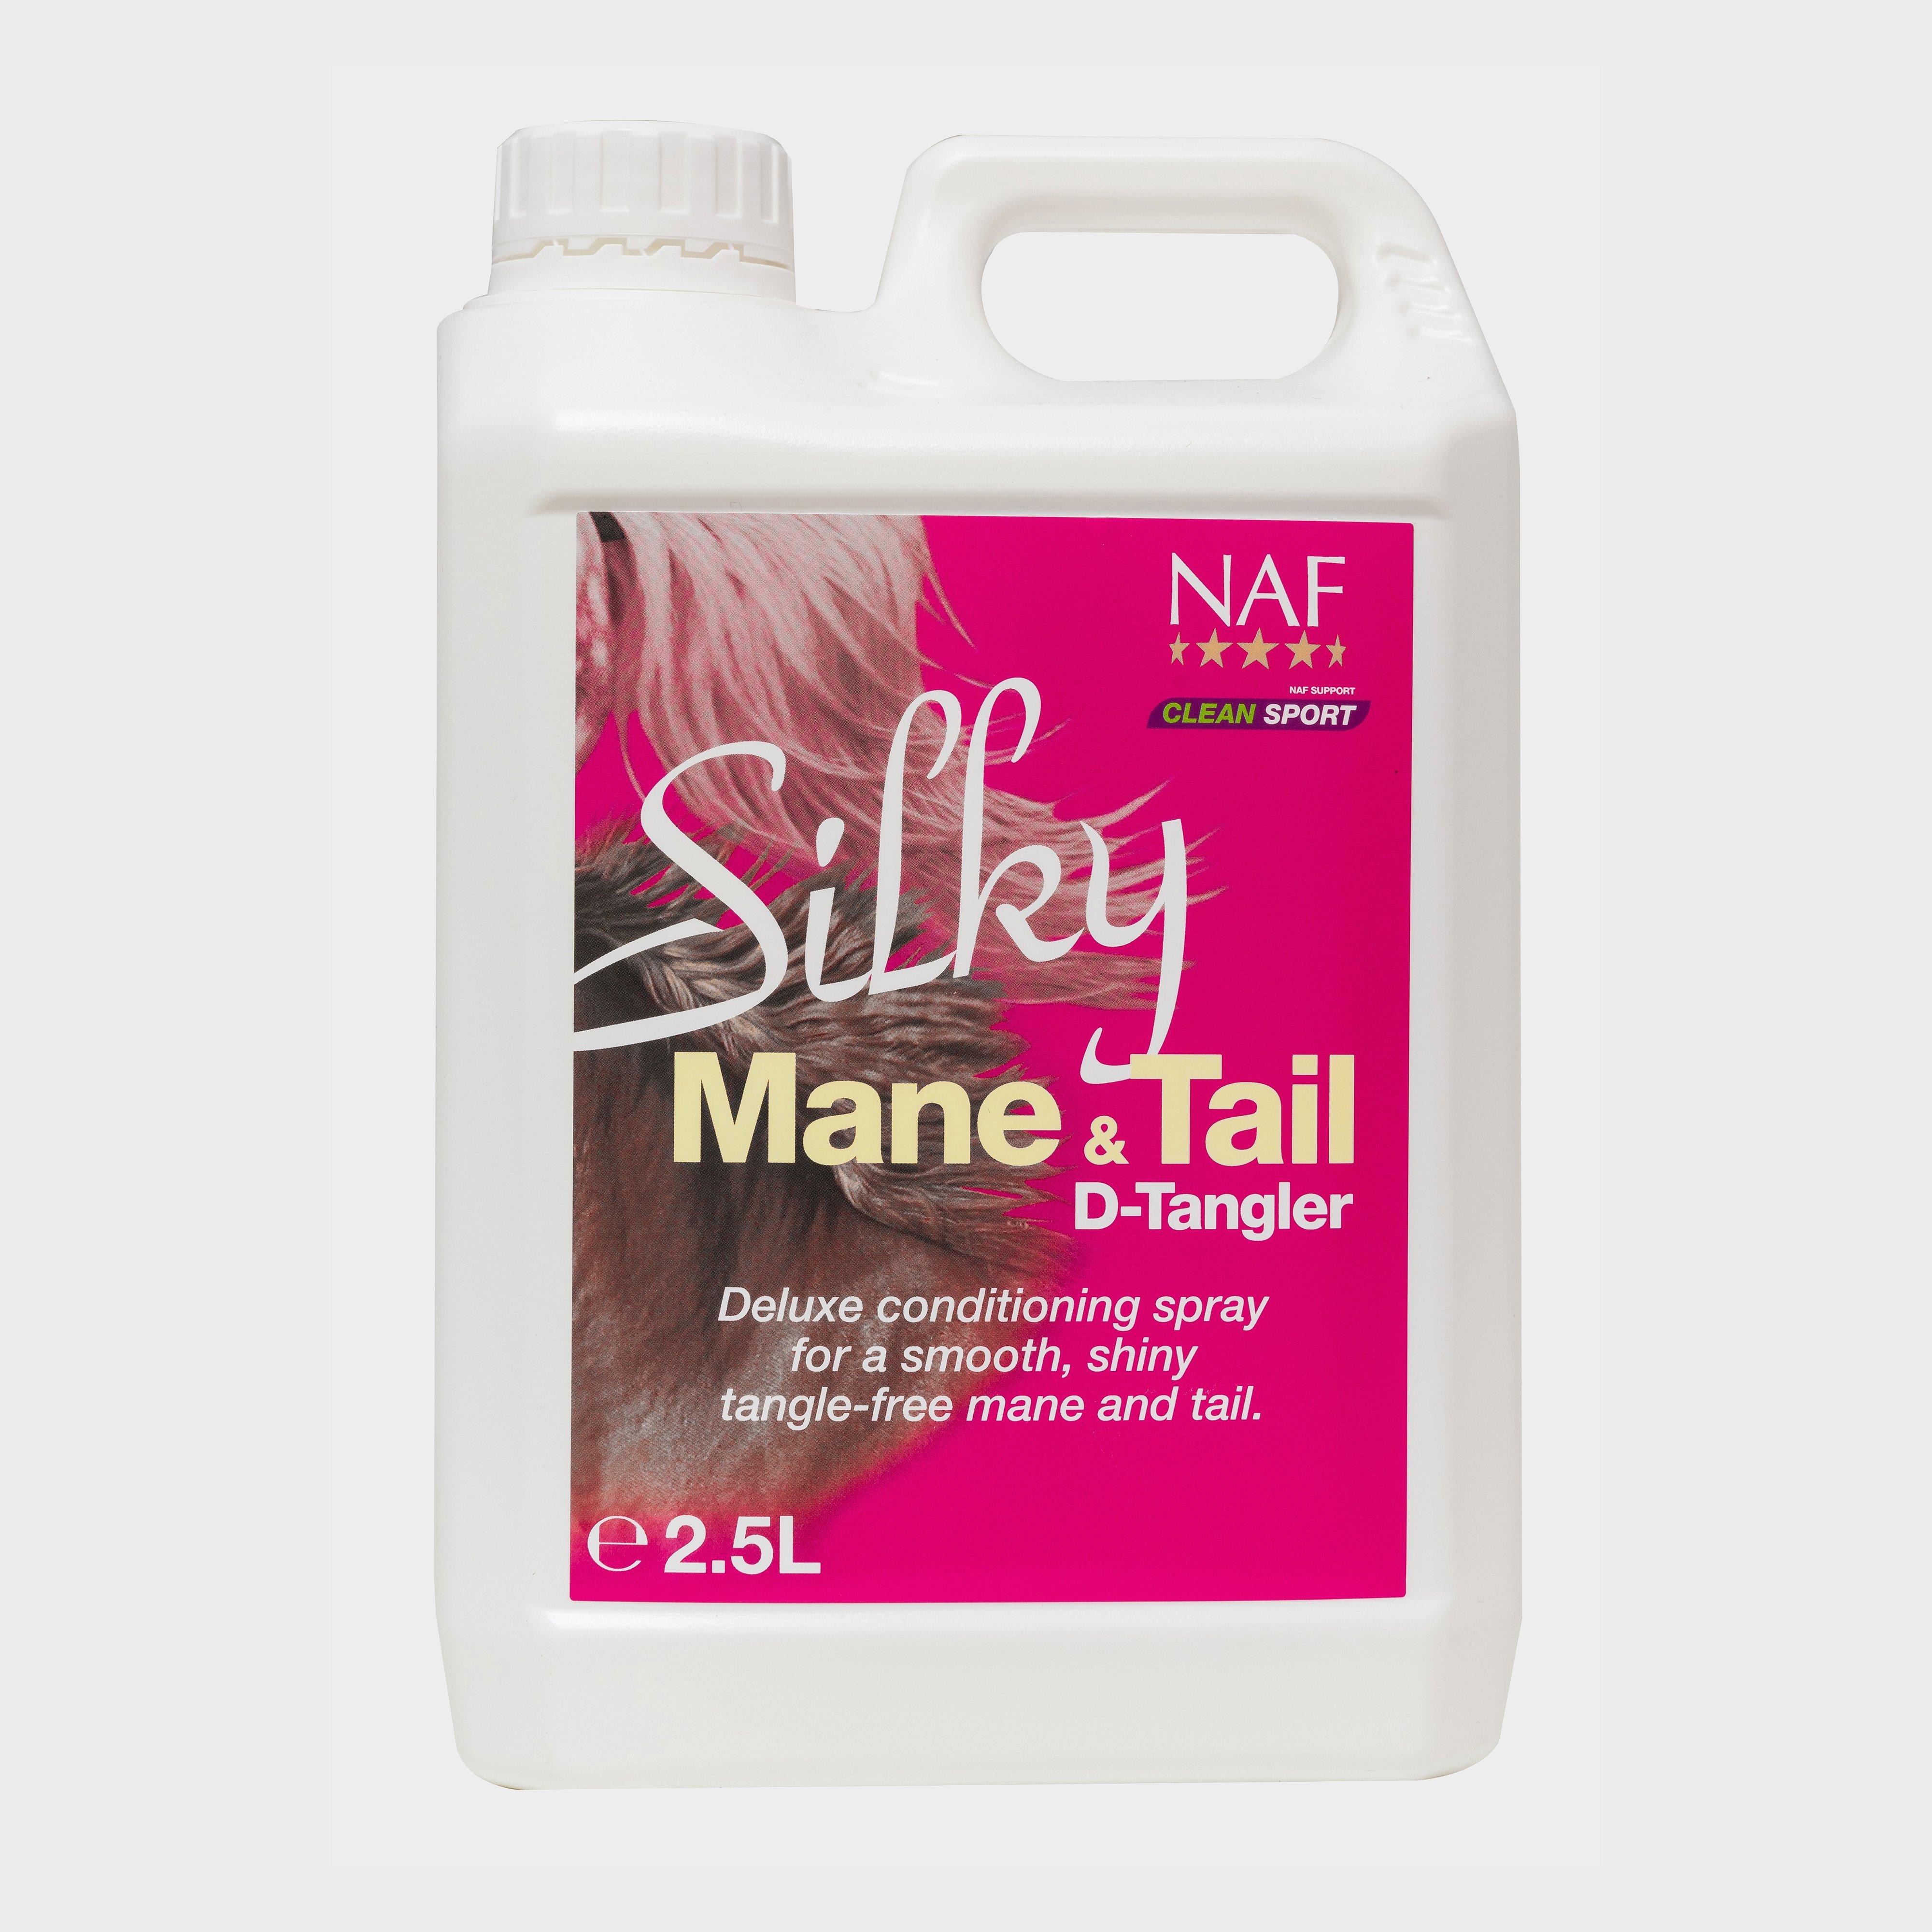  NAF Silky Mane & Tail Refill, Multi Coloured